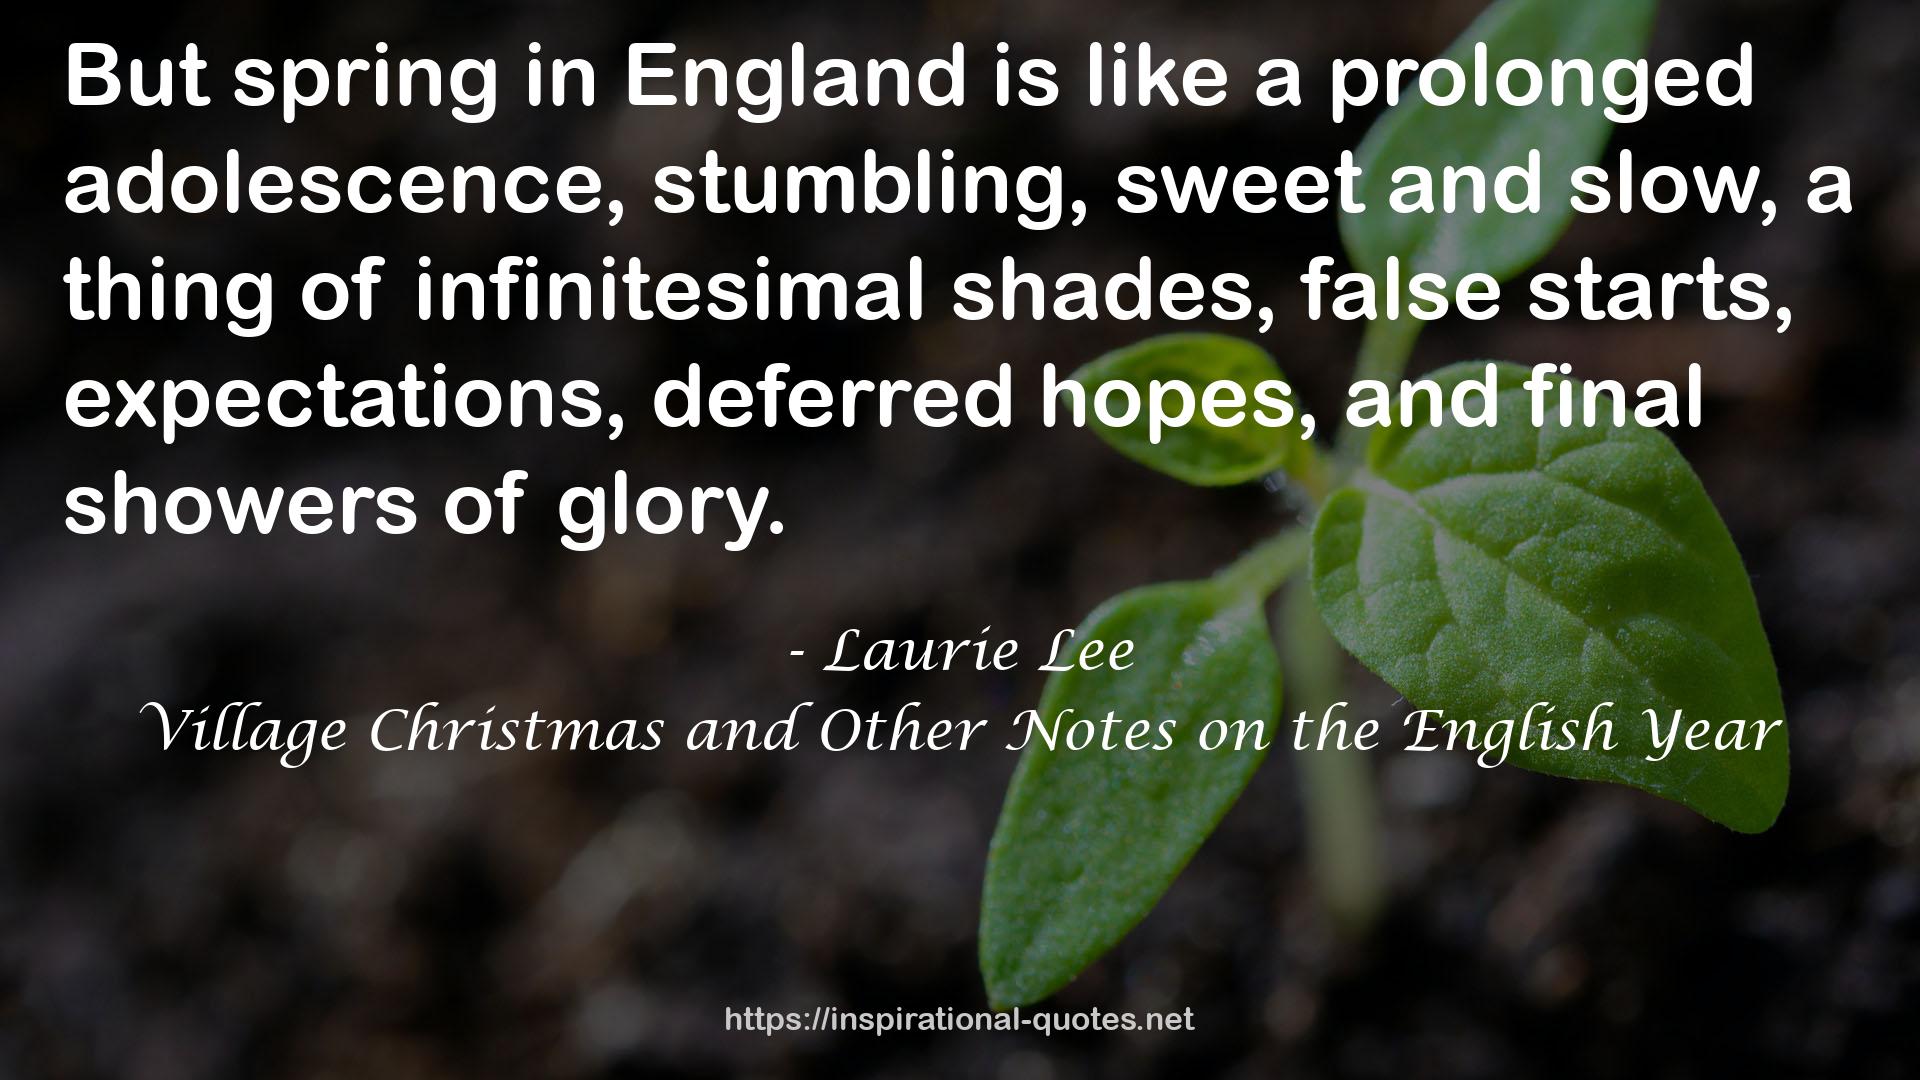 Village Christmas and Other Notes on the English Year QUOTES